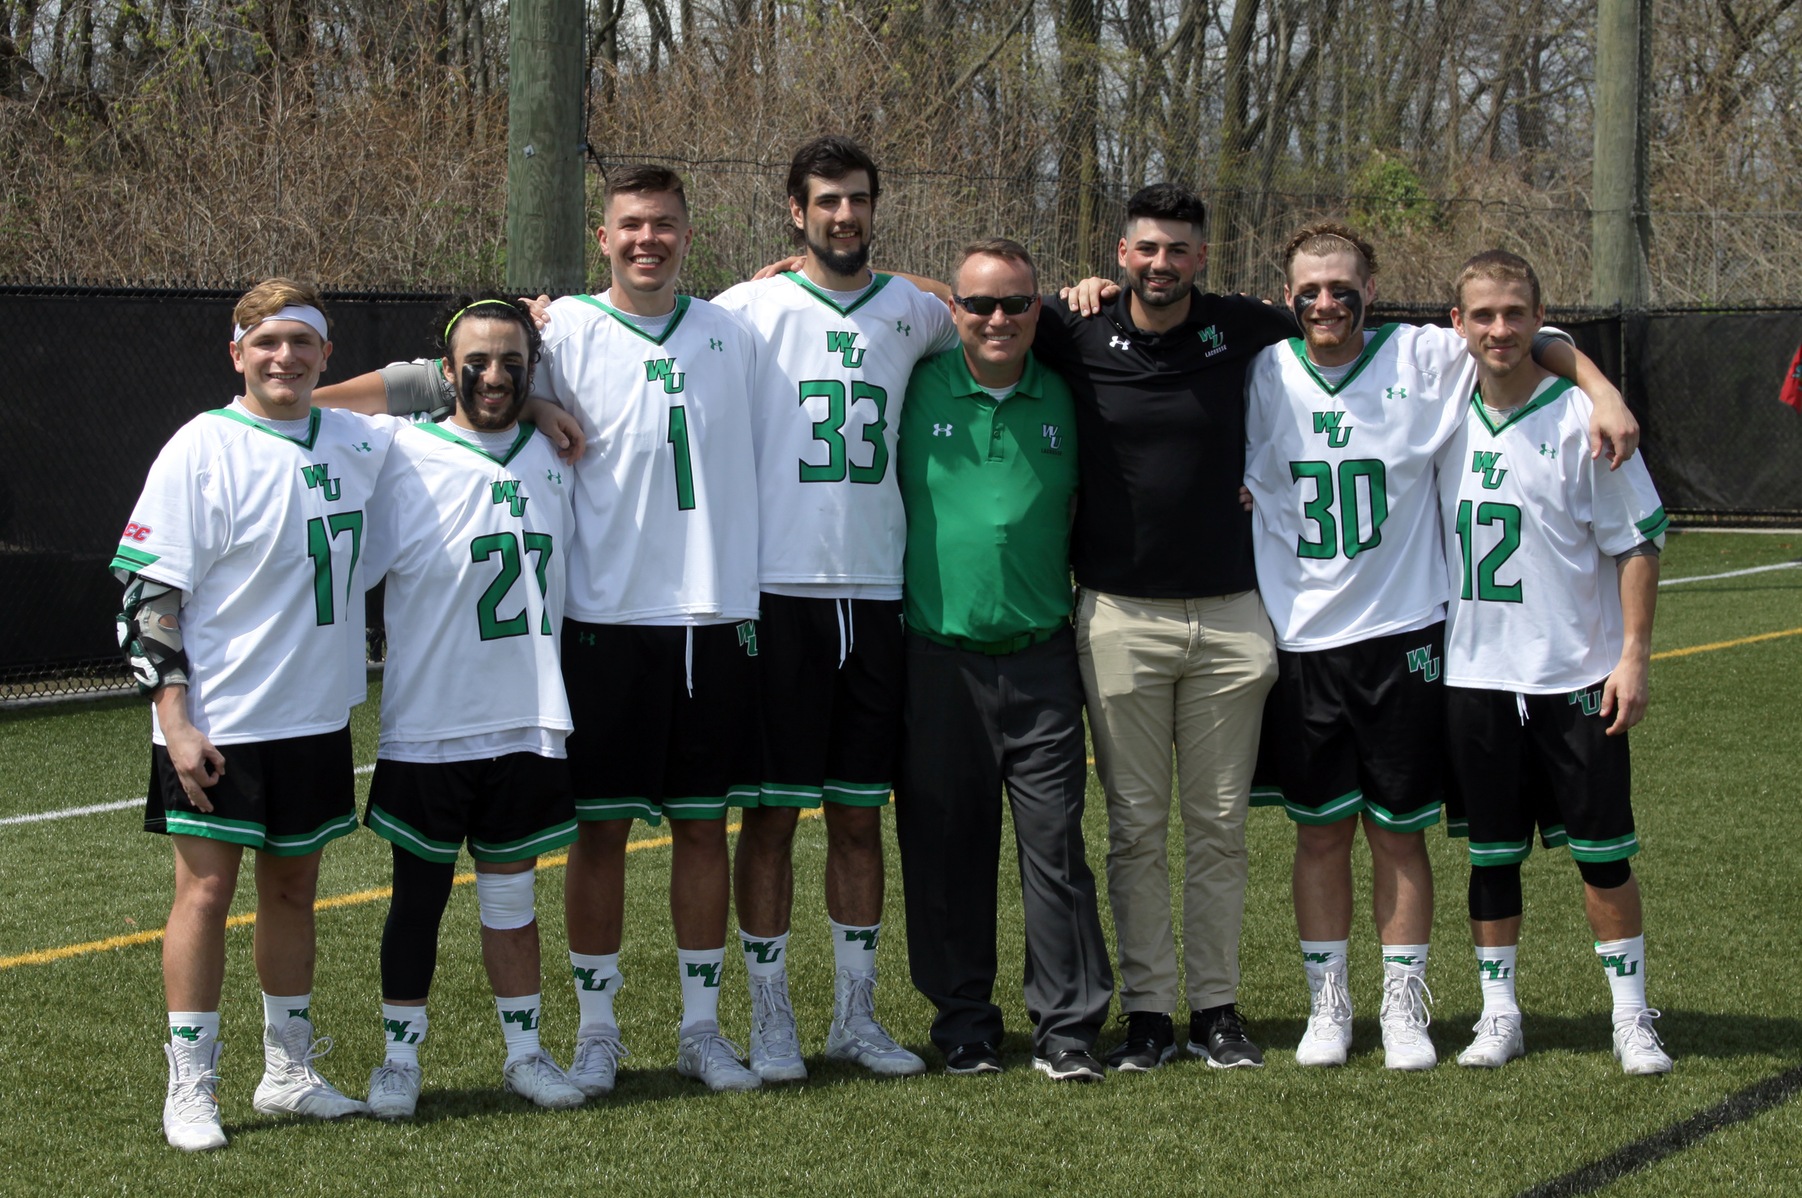 Copyright 2019; Wilmington University. All rights reserved. Photo of the seniors with head coach Christian Zwickert on April 13, 2019 vs. Post. Photo by Katlynne Tubo